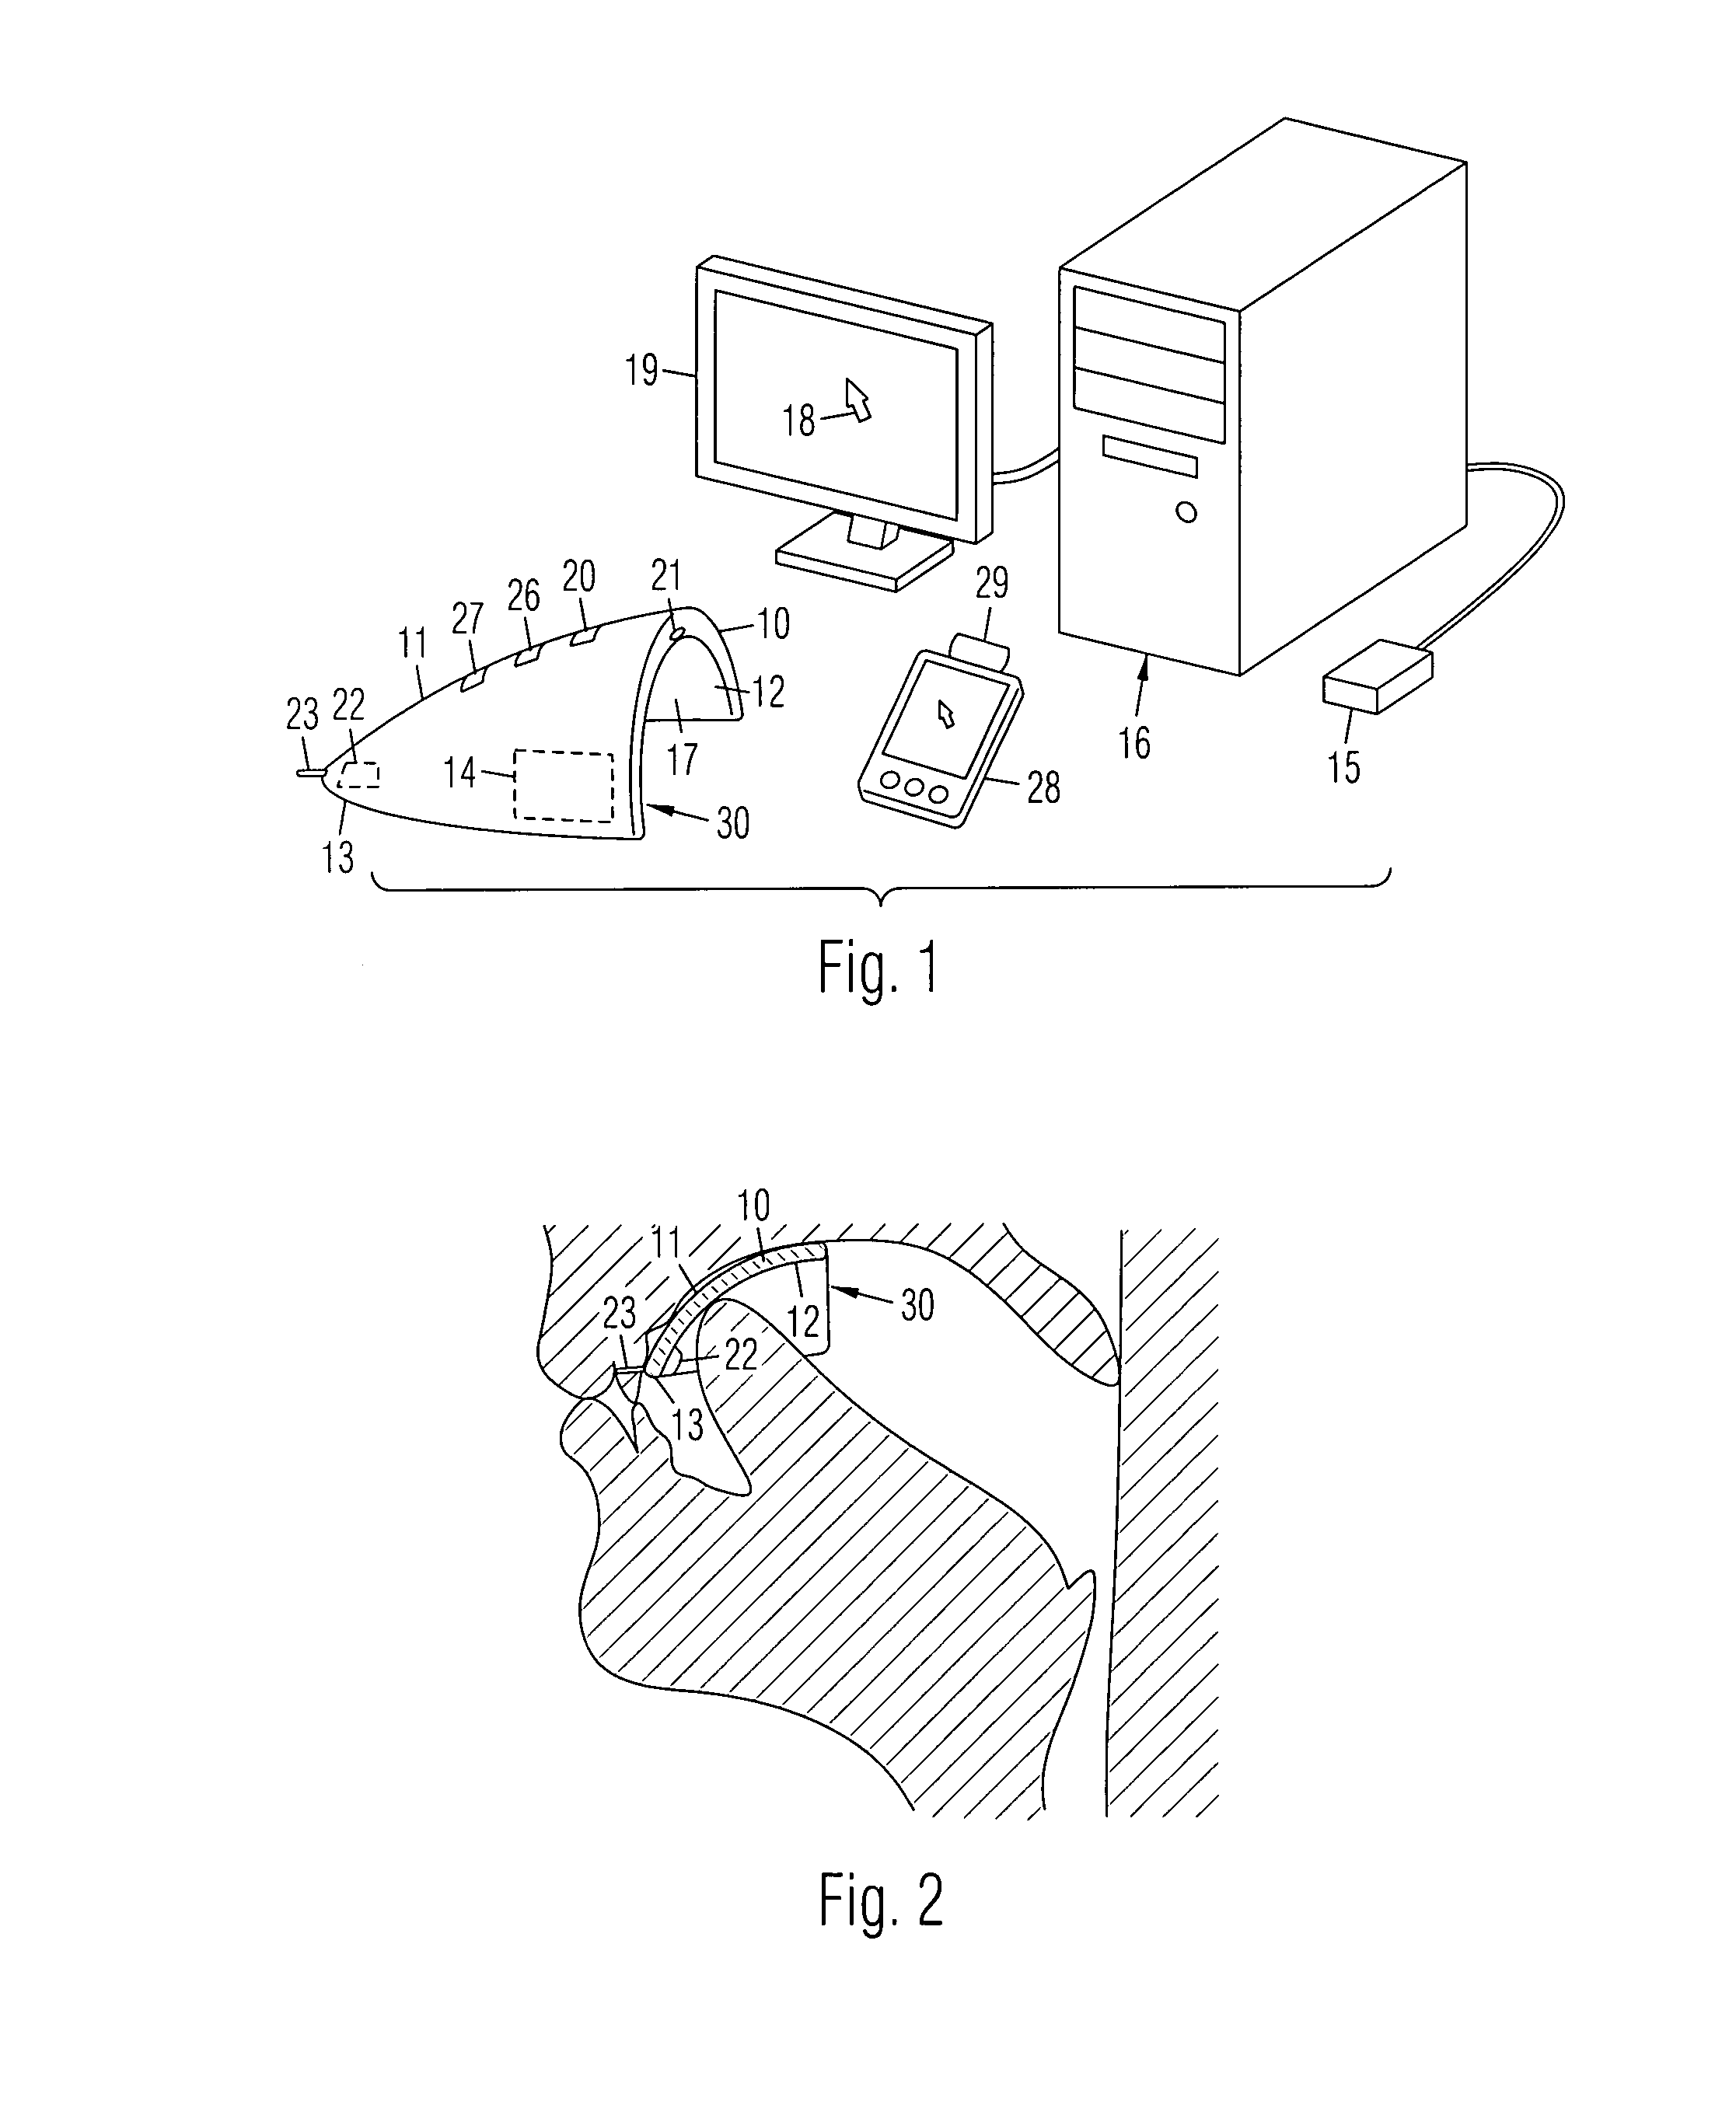 Mouth mounted input device